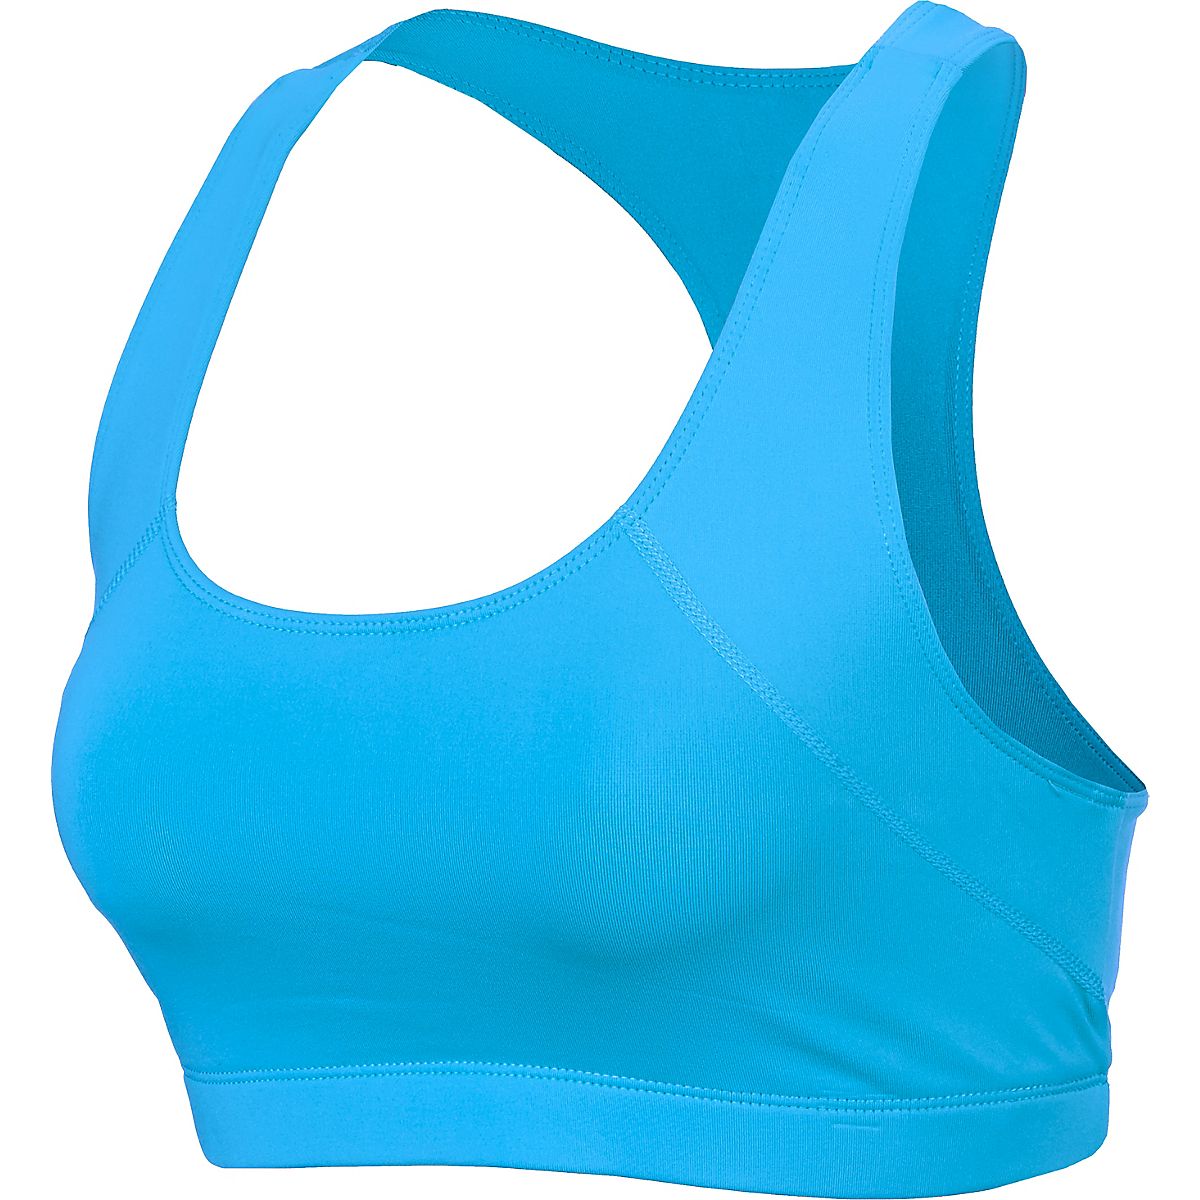 GYMSQUAD® SUPPORTIVE SPORTS BRA - TIE-DYE BLUE – GYMSQUAD INDIA